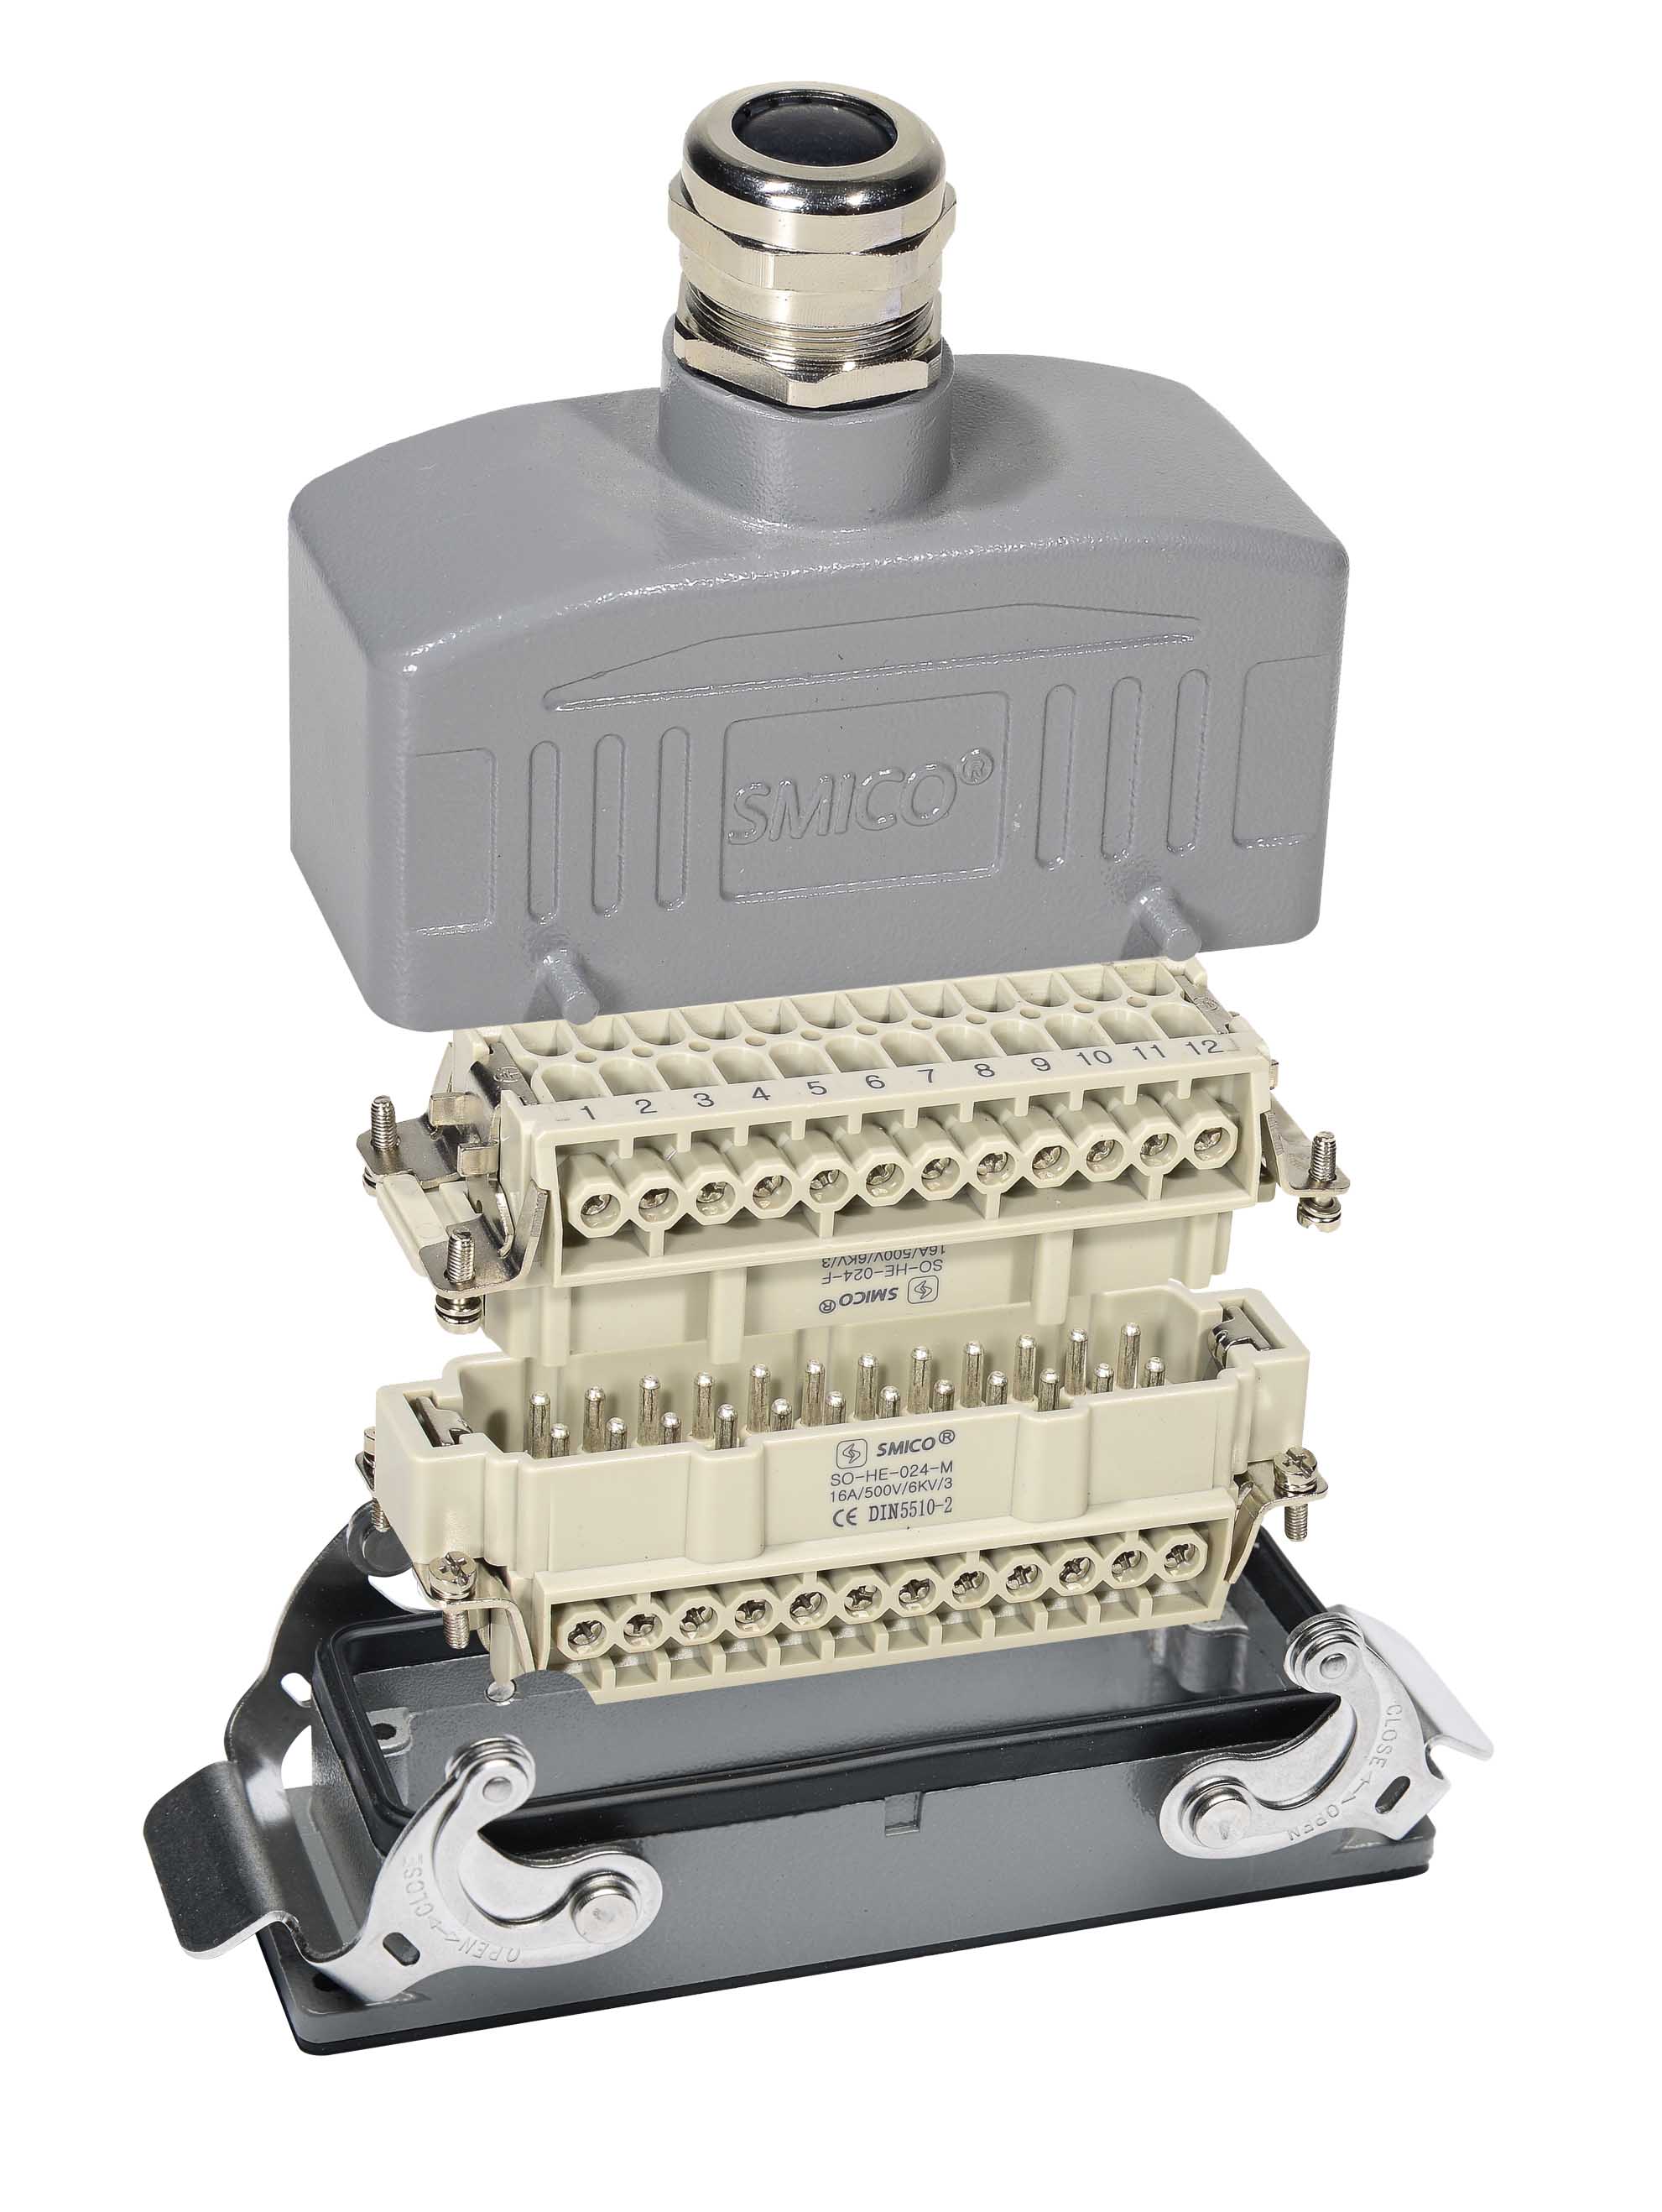 The Importance of Heavy Duty Connectors for Power and Industrial Automation